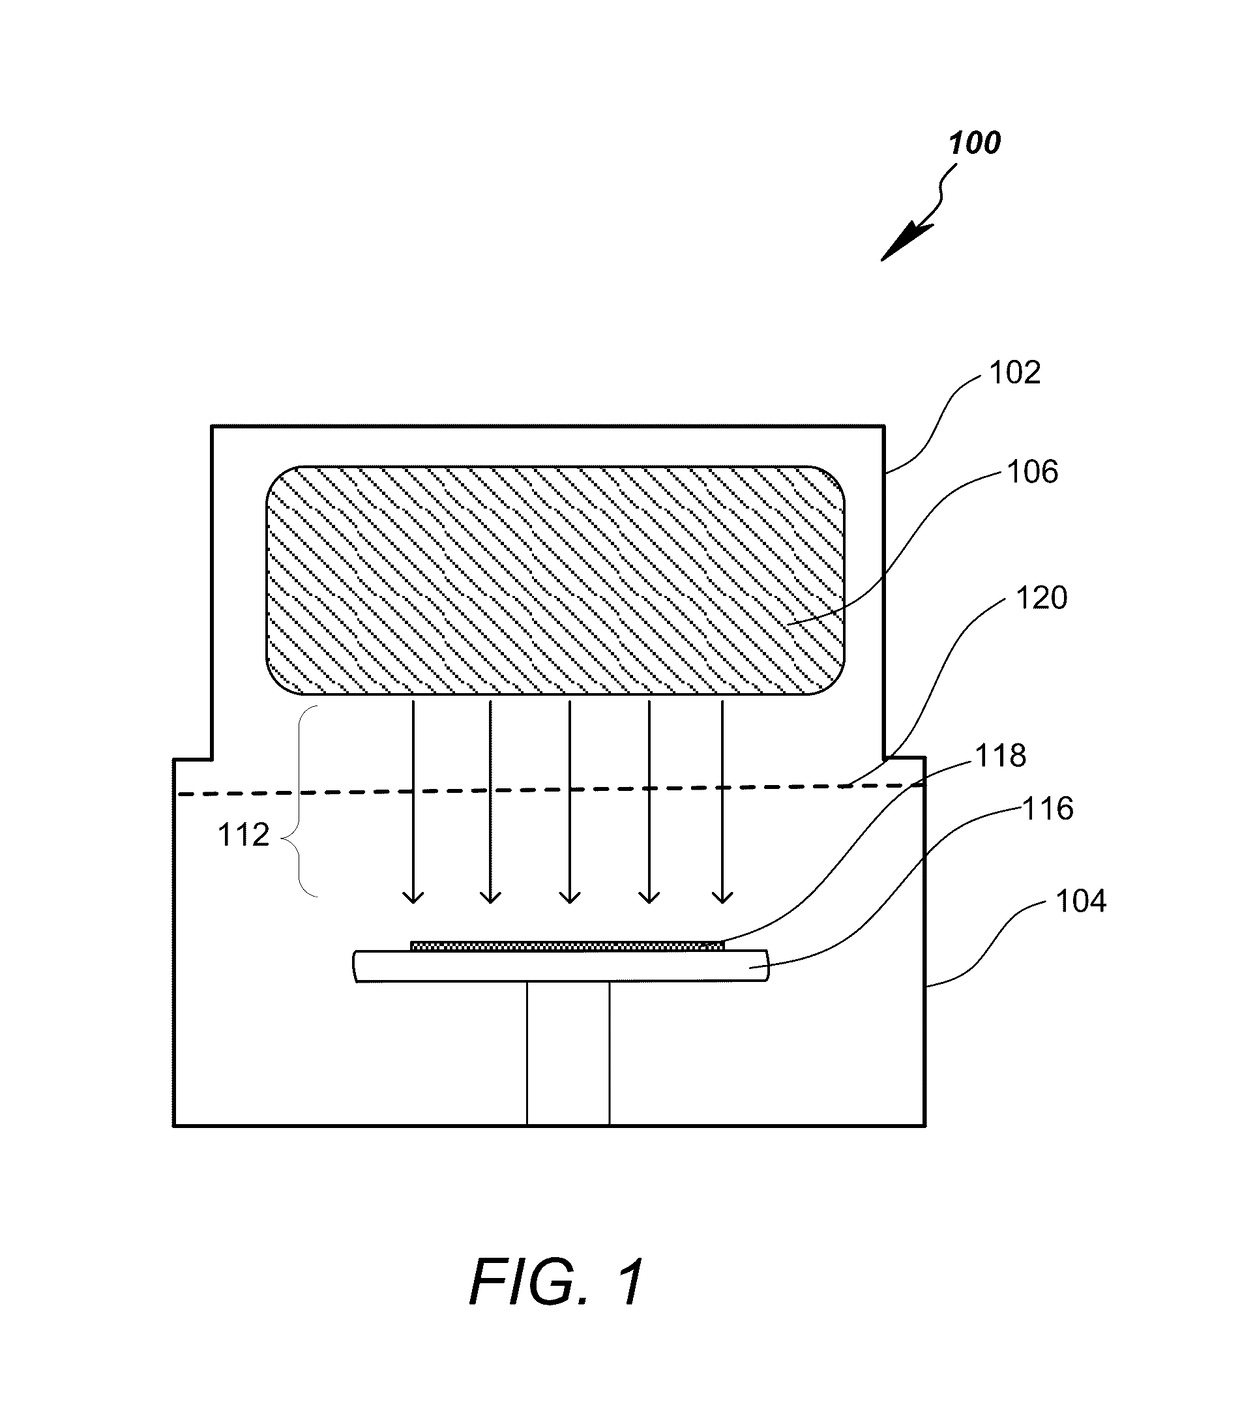 Plasma-based material modification using a plasma source with magnetic confinement